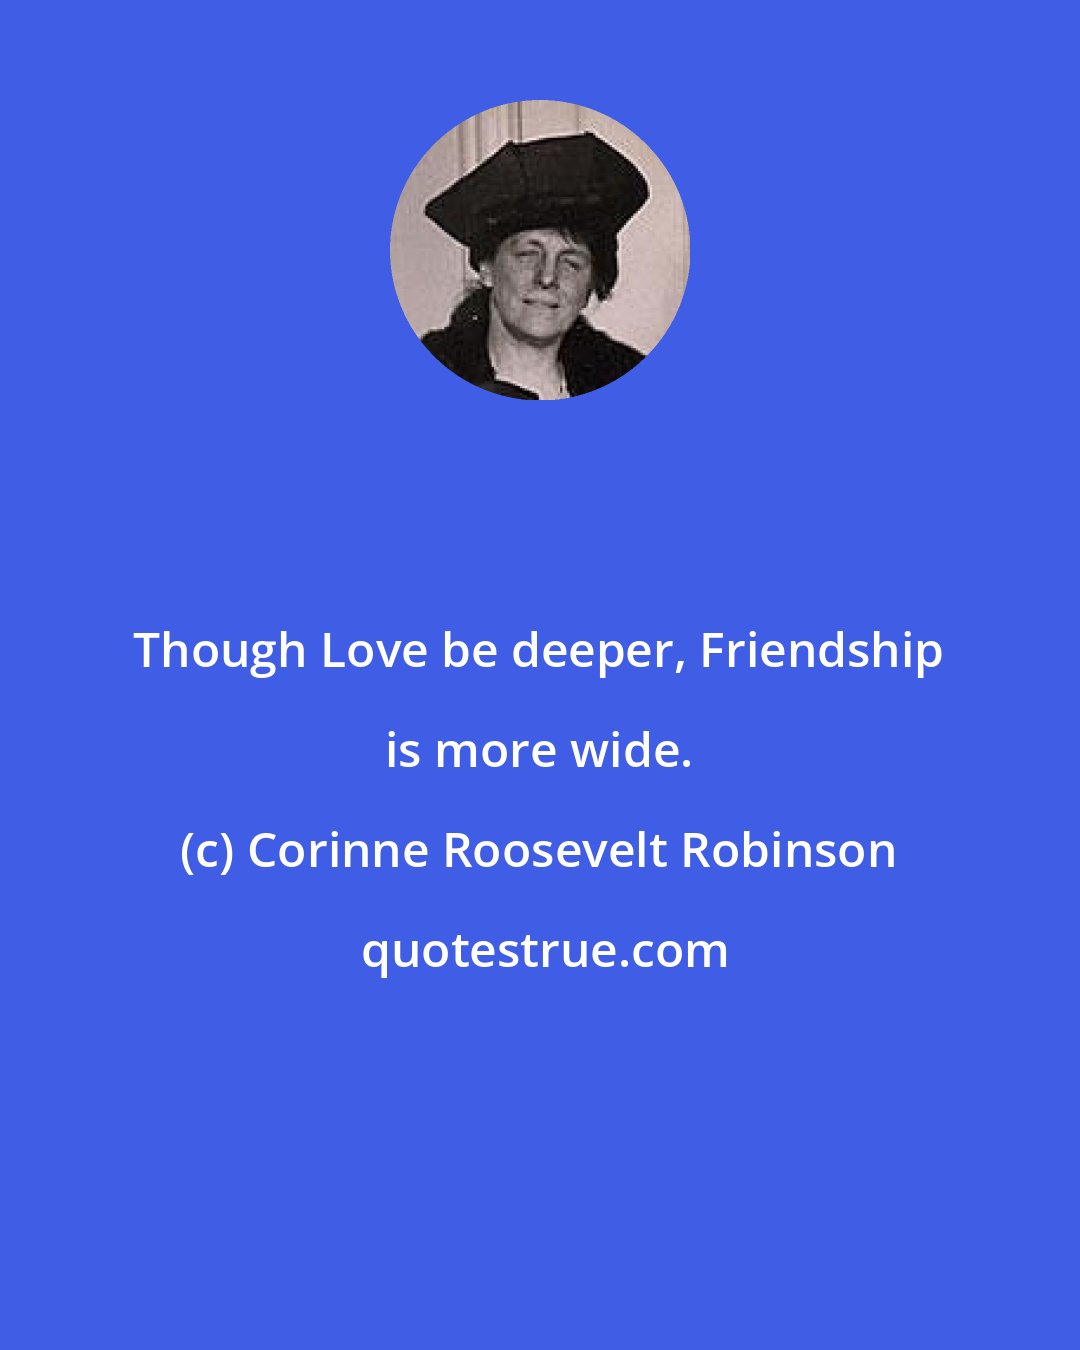 Corinne Roosevelt Robinson: Though Love be deeper, Friendship is more wide.